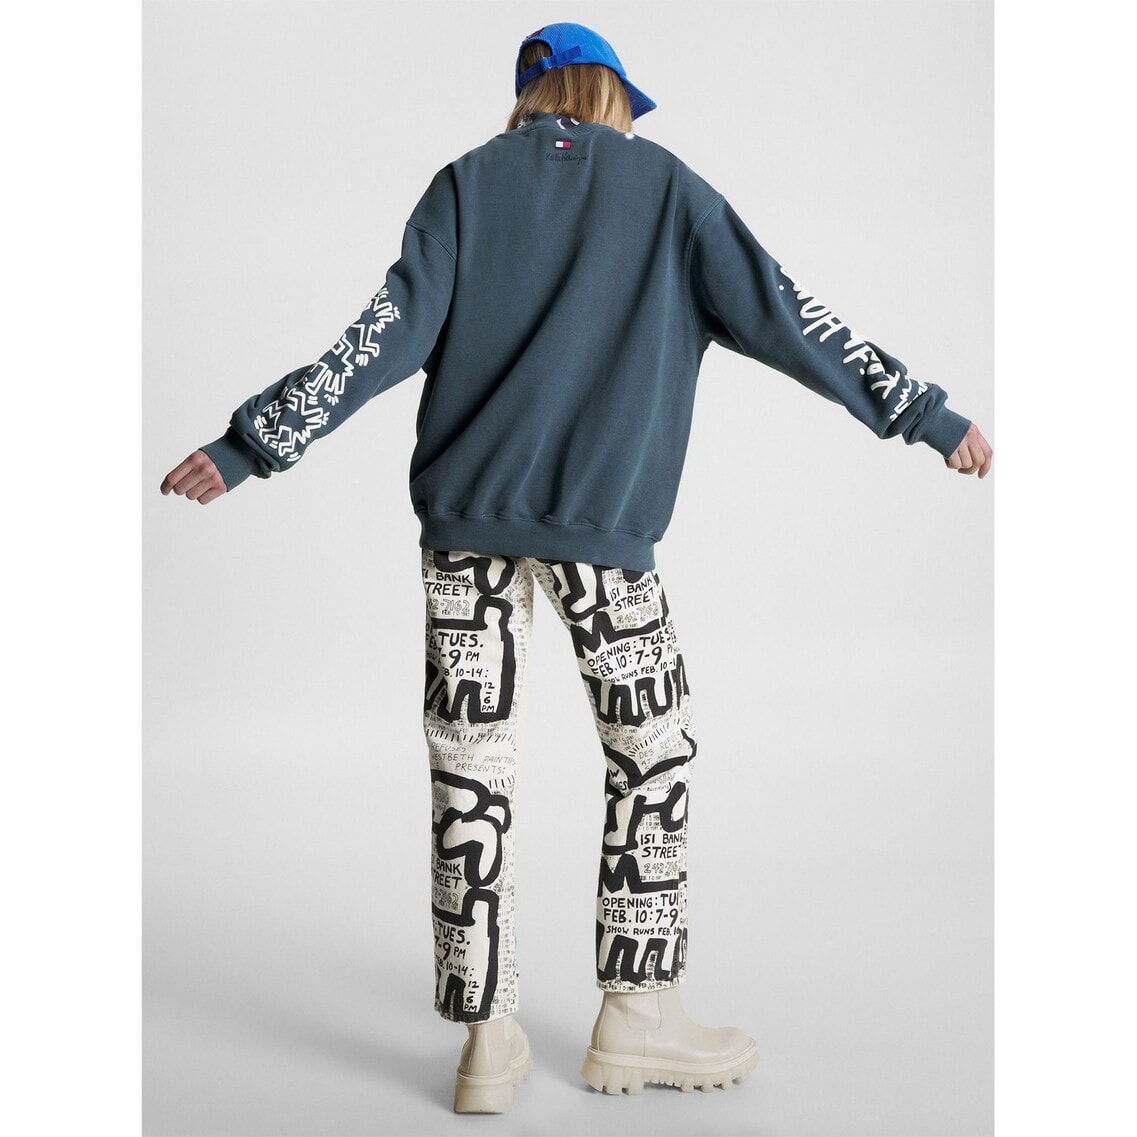 TOMMY JEANS X KEITH HARING スウェットシャツ | TOMMY HILFIGER 